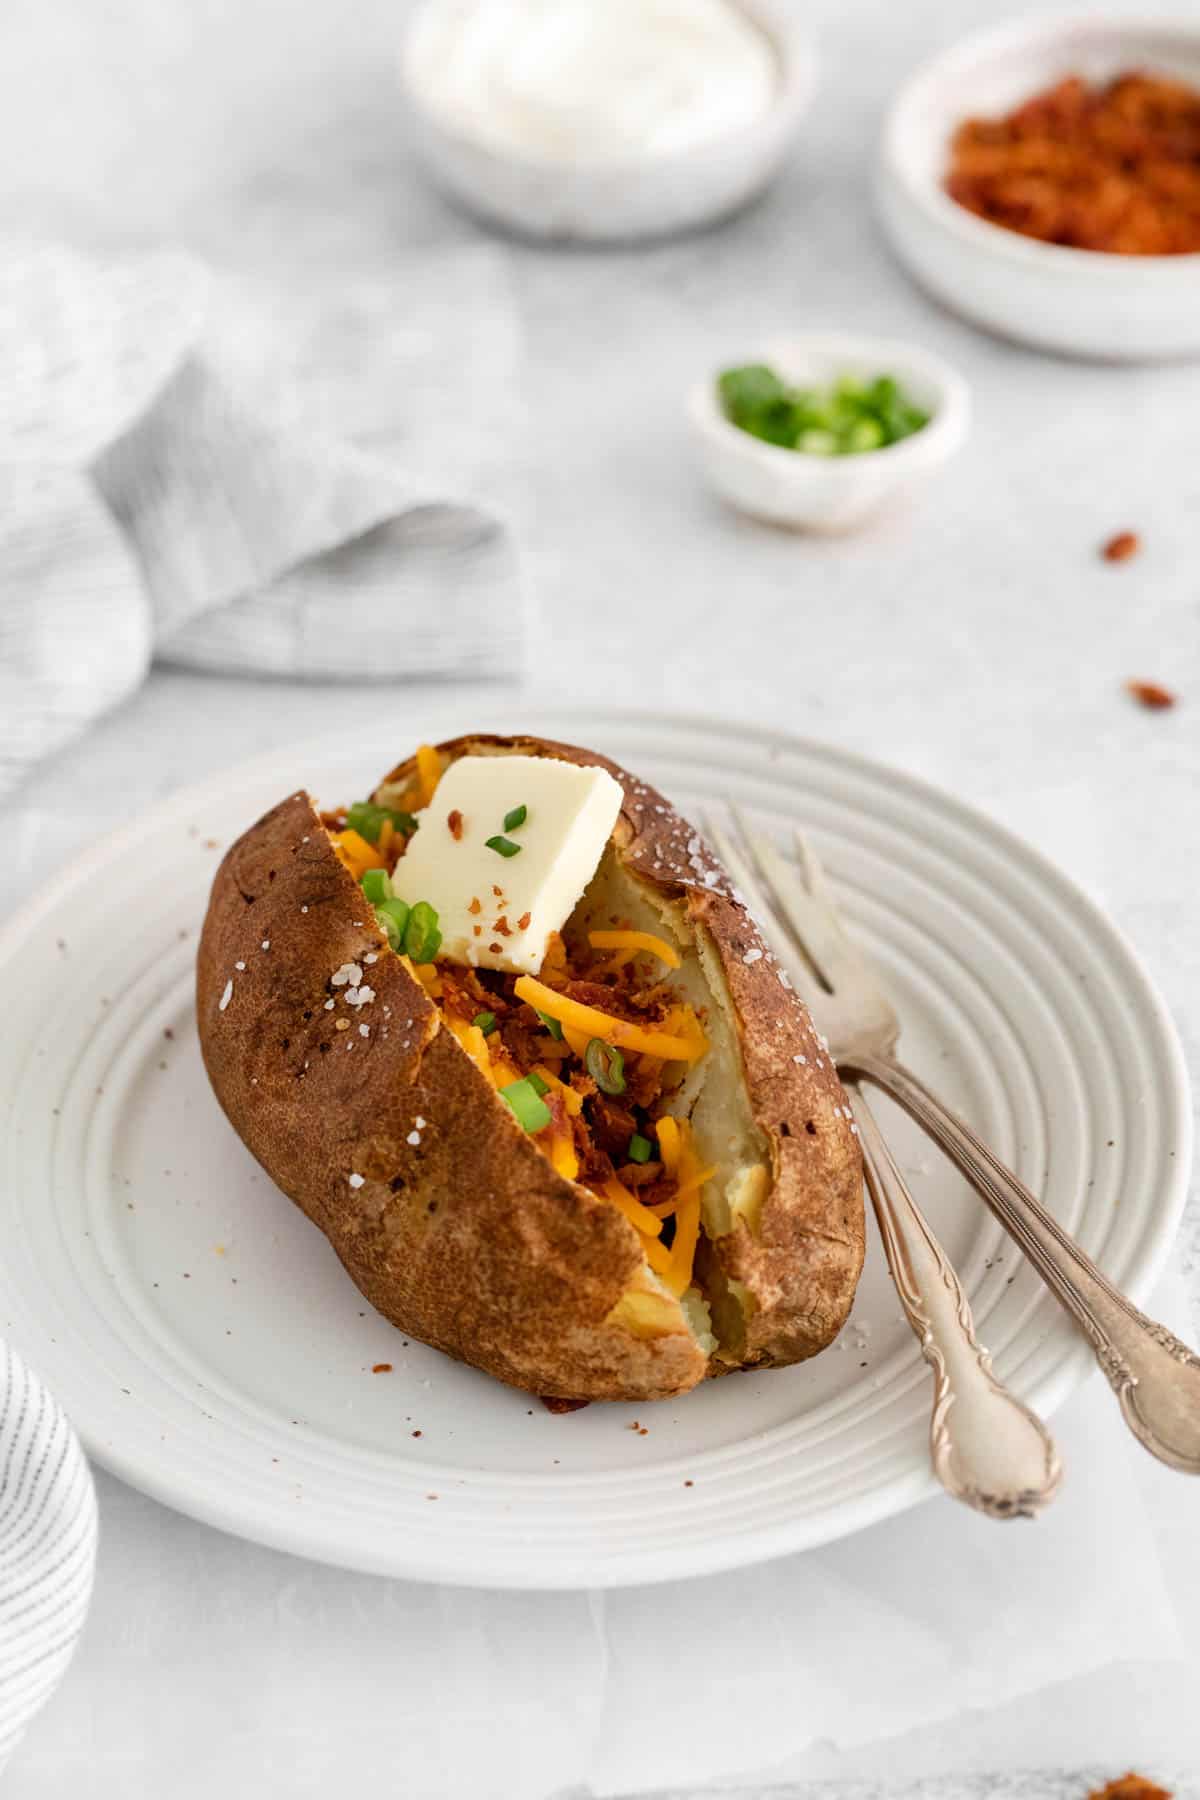 A baked potato with butter, cheese, and bacon on a white plate.